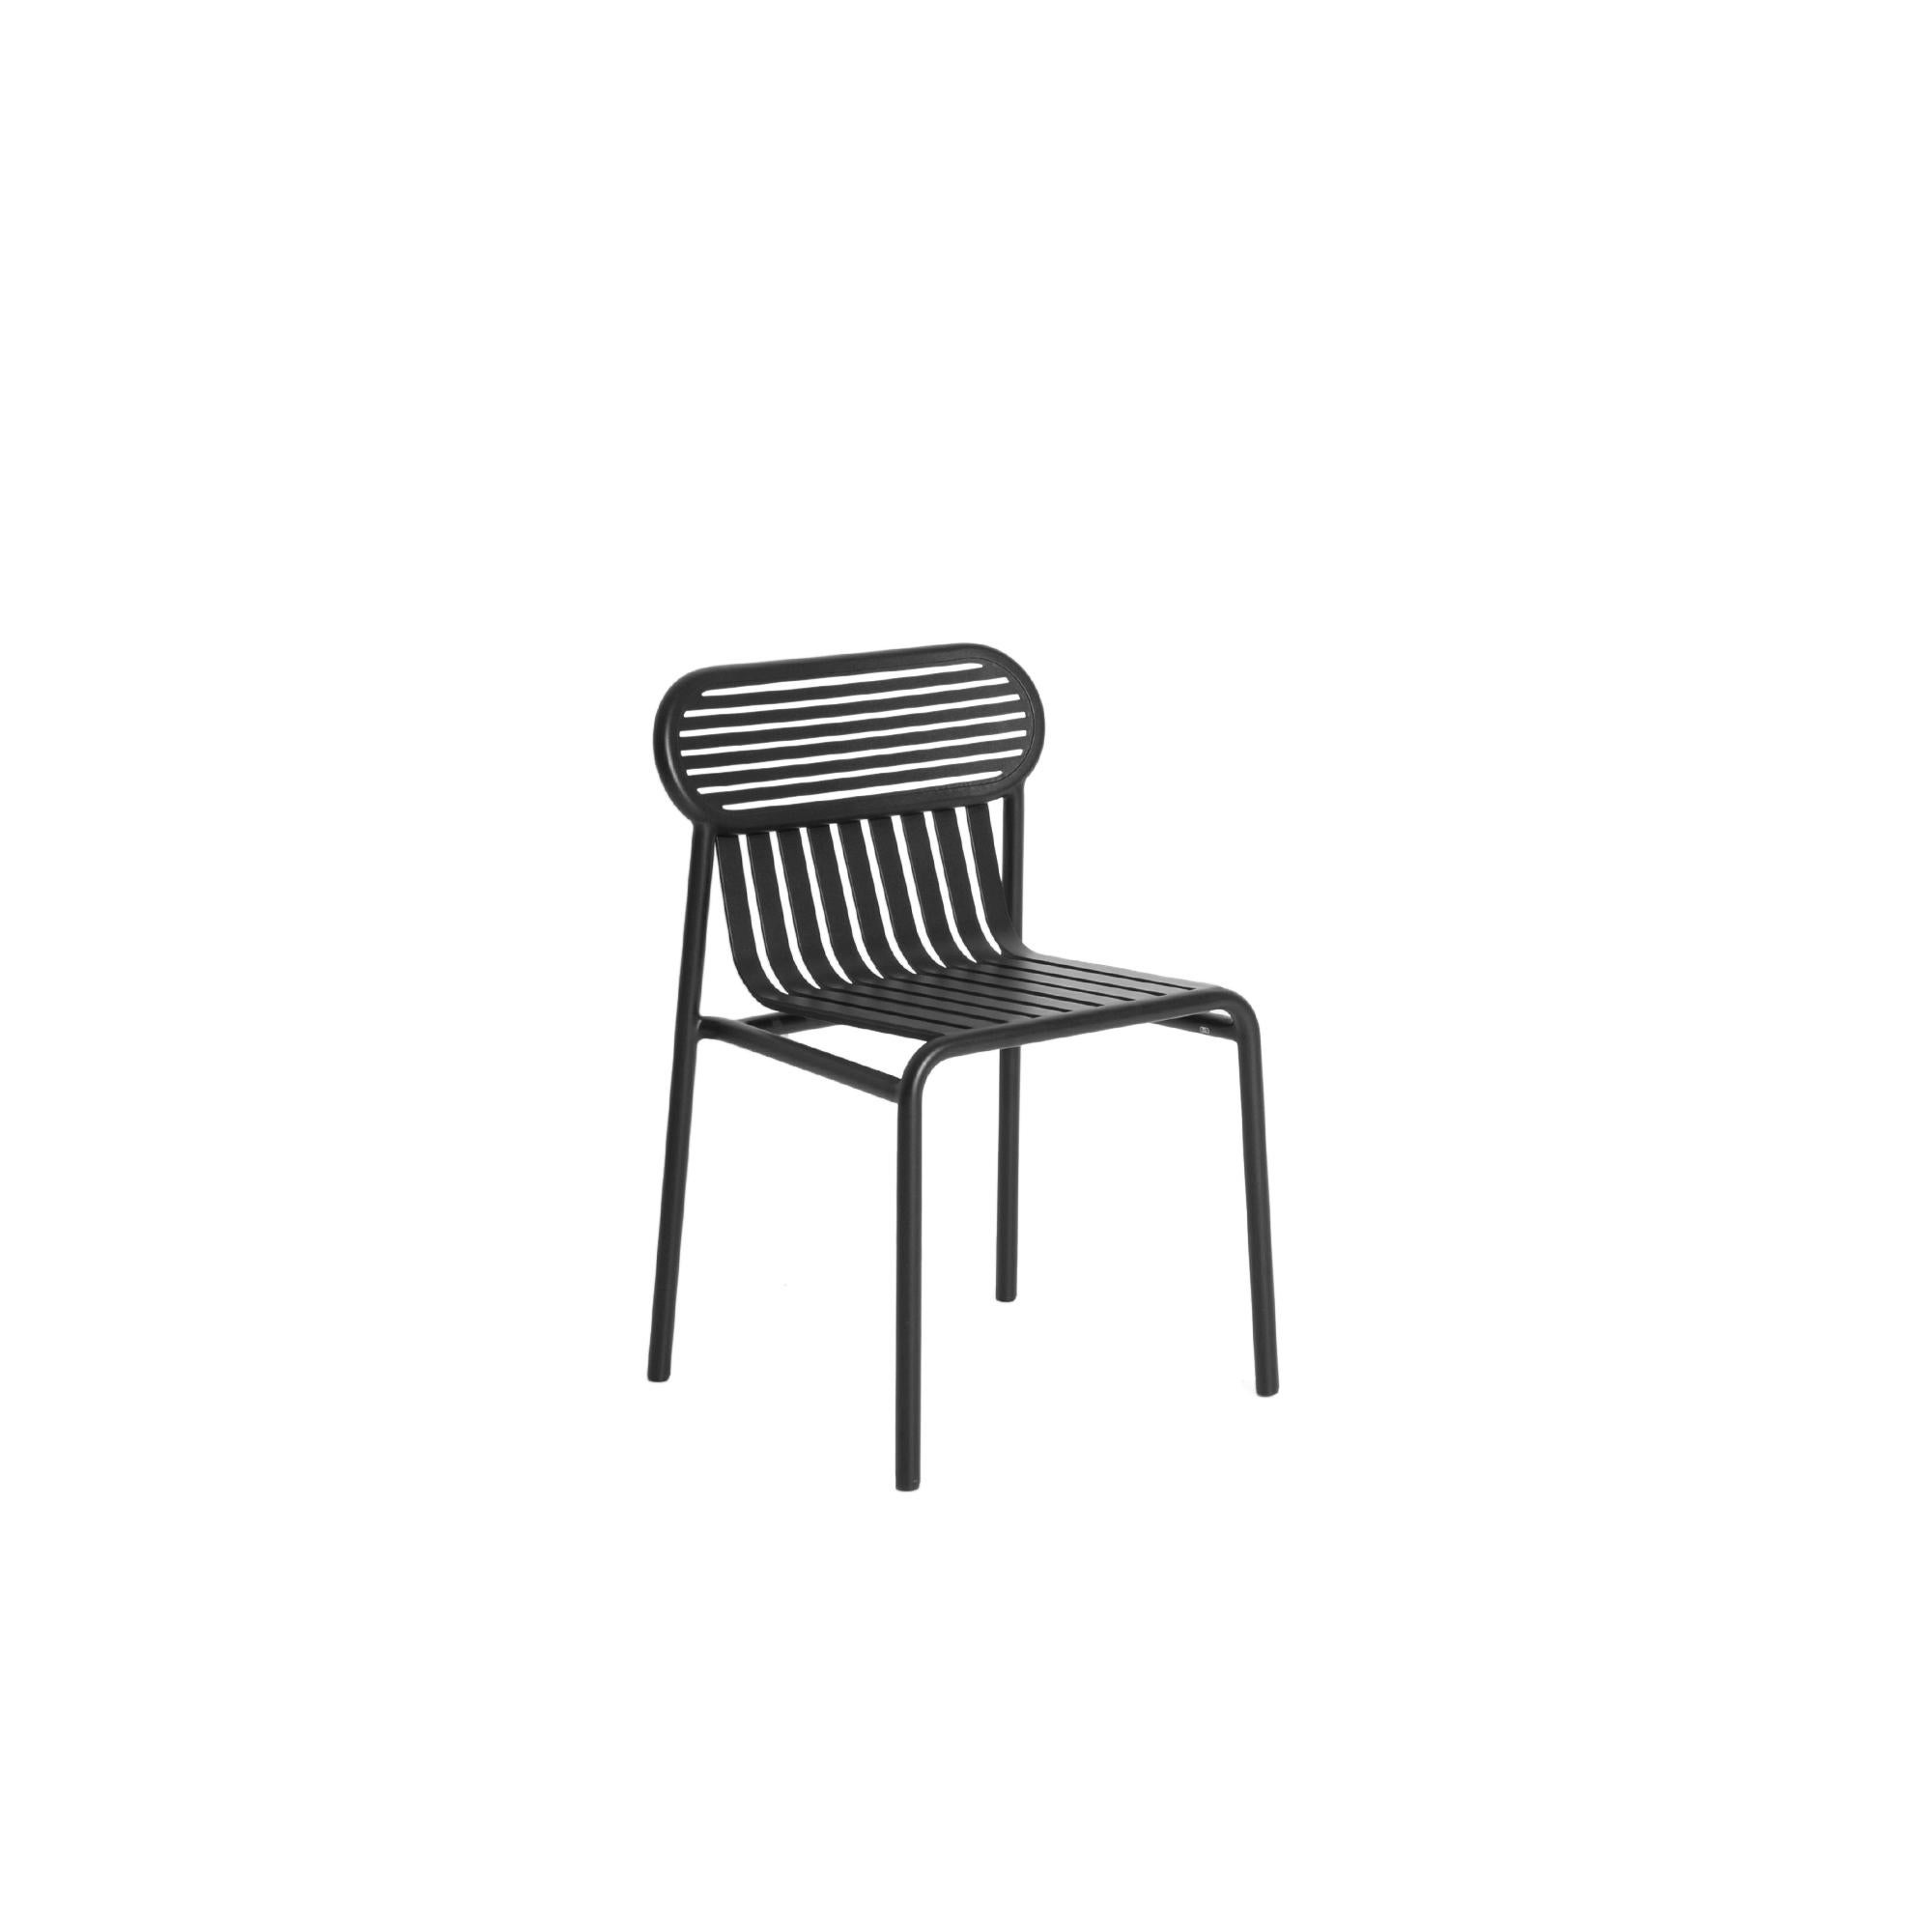 Petite Friture Week-End Chair in Black Aluminium by Studio BrichetZiegler, 2017

The week-end collection is a full range of outdoor furniture, in aluminium grained epoxy paint, matt finish, that includes 18 functions and 8 colours for the retail